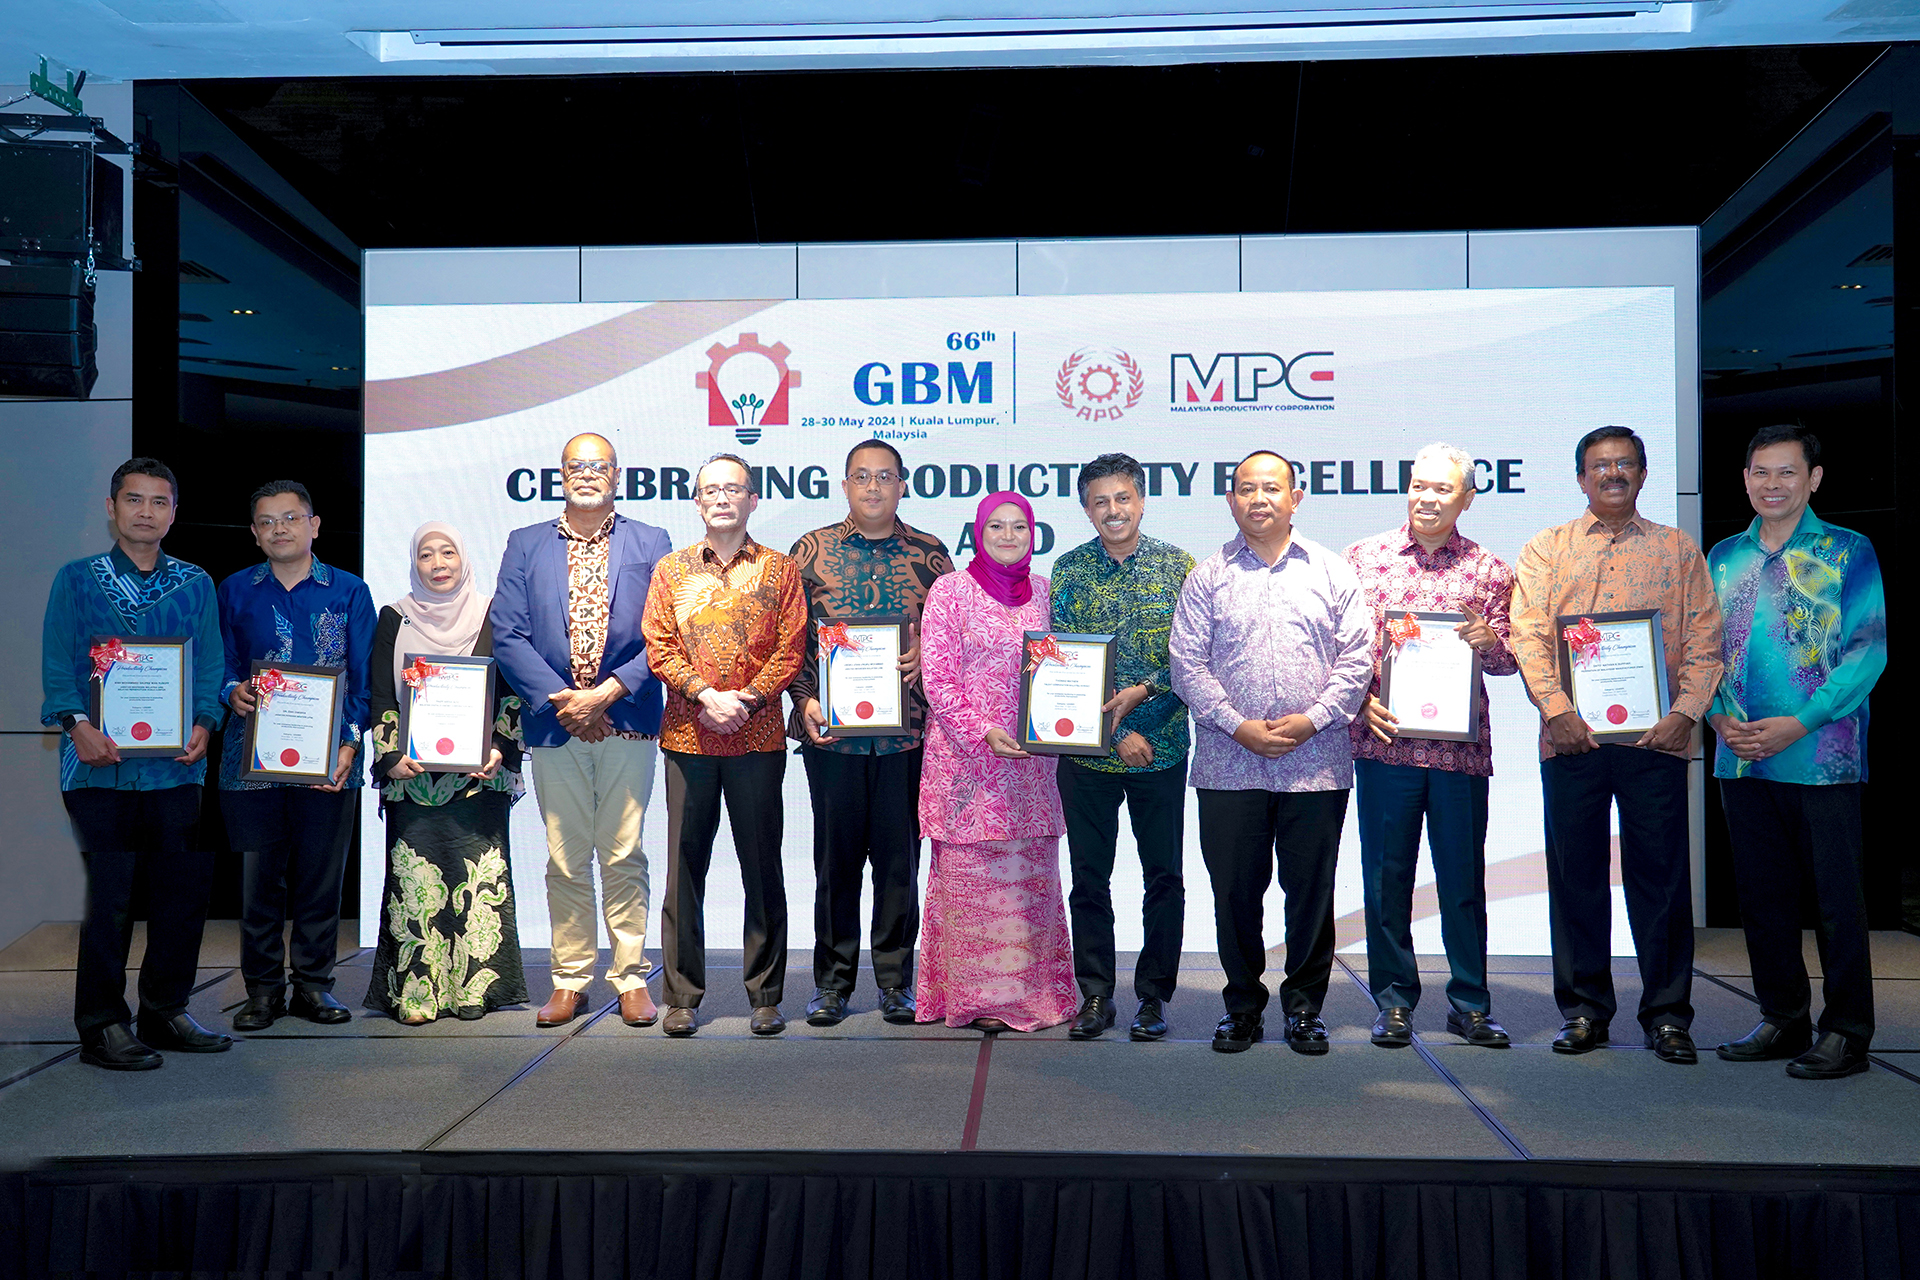 Mr. Thomas Mathew, CEO of TalentCorp, together with YM Ungku Joha Ungku Mohamad, Director of Expatriate Services Division (ESD), Immigration Department Malaysia and Ms. Sabihah Ahamad, Senior Vice President, MYXpats Operations alongside with other award recipients.